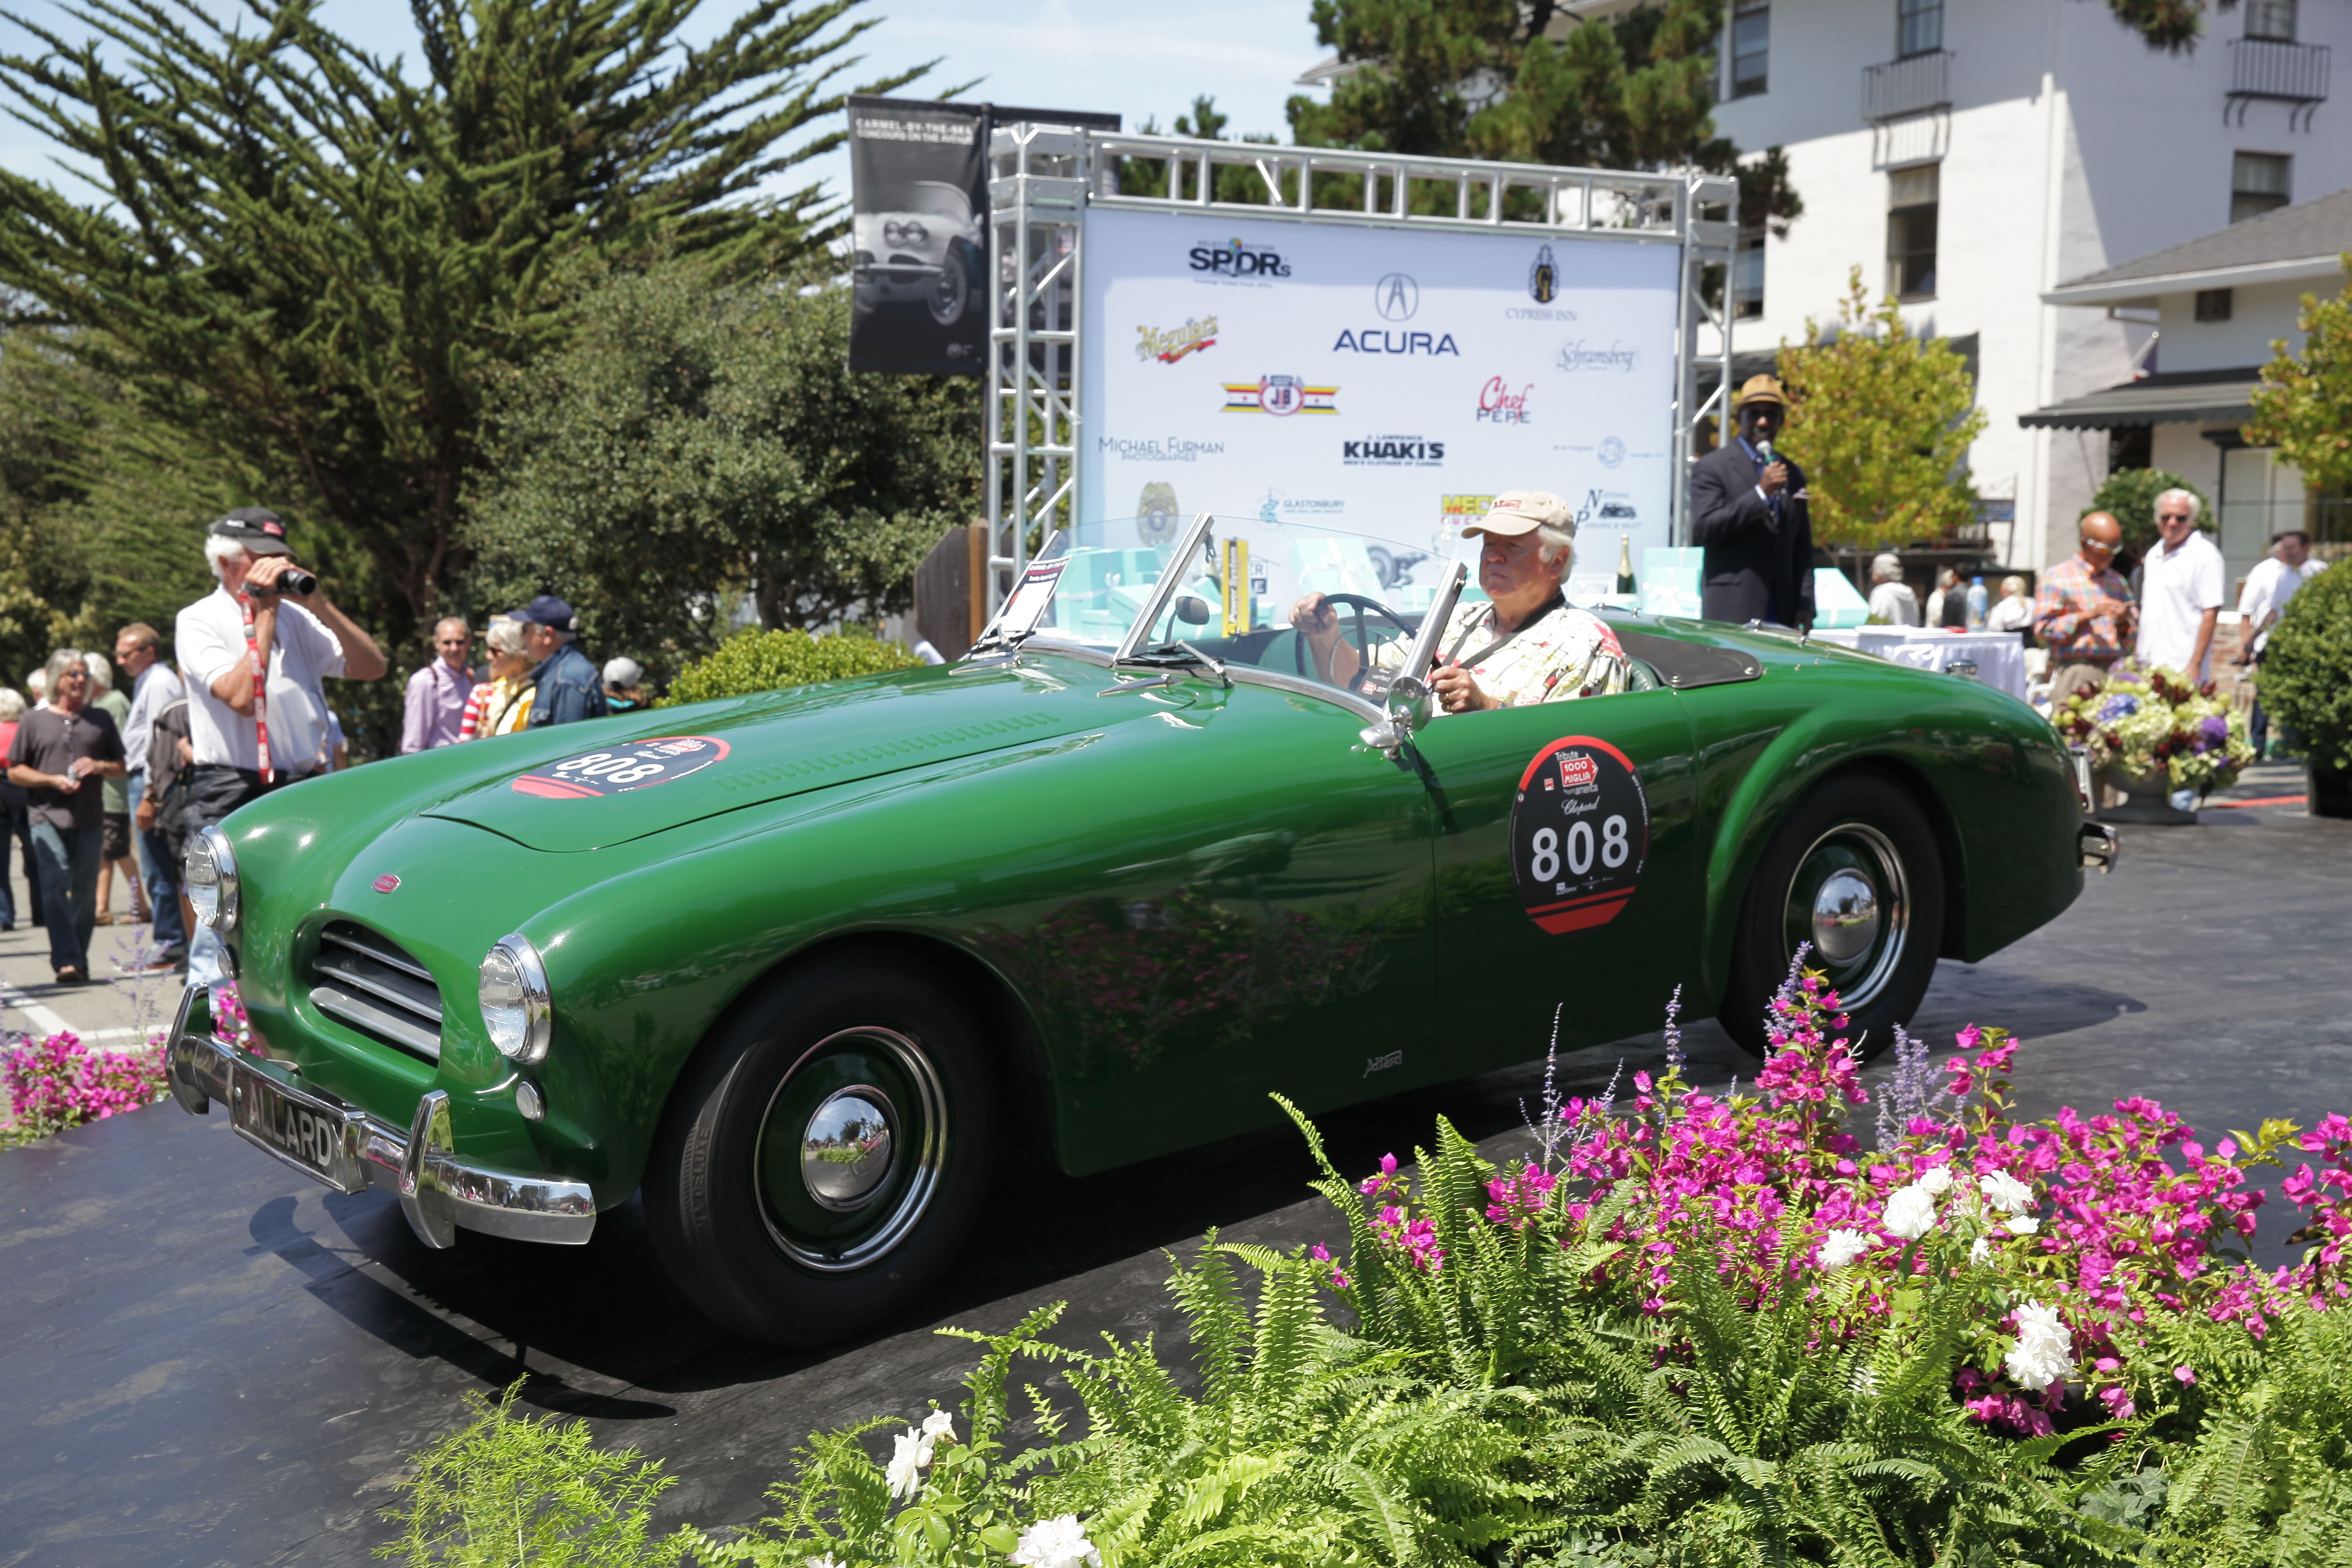 Concours on the Avenue Carmel